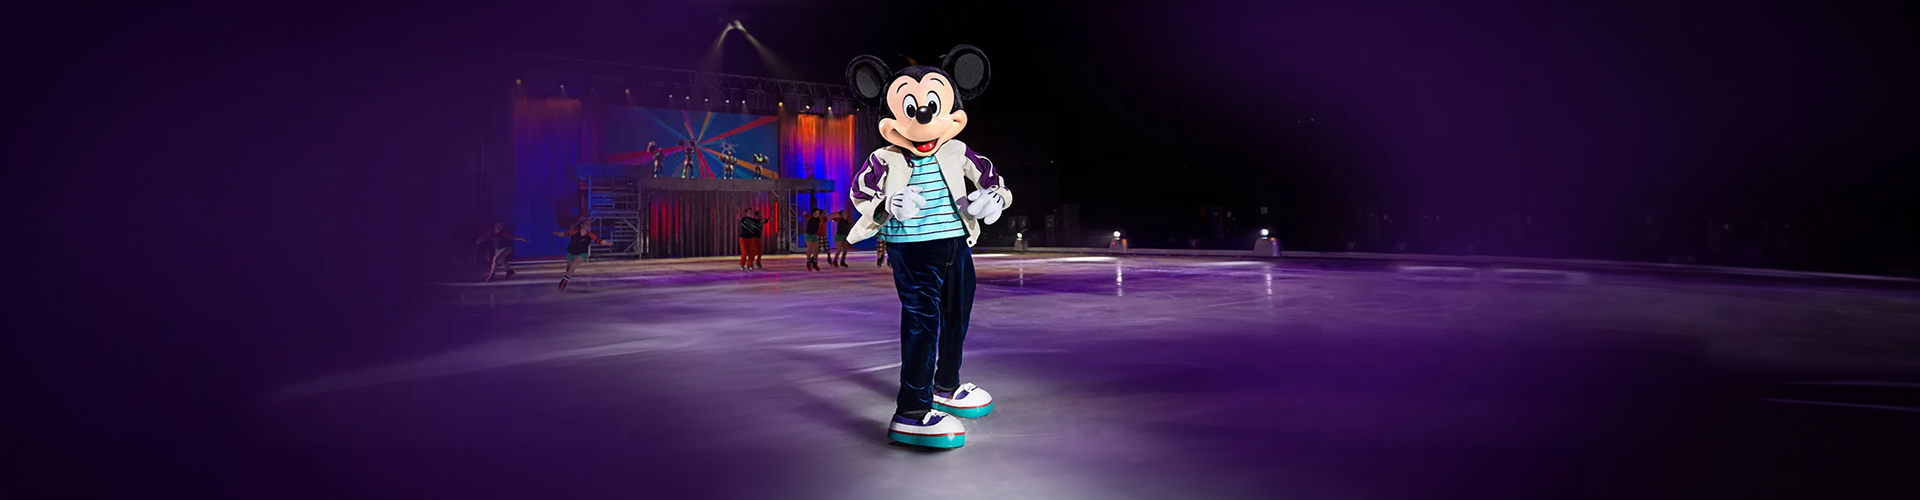 Meet our Newest Disney On Ice Friend!